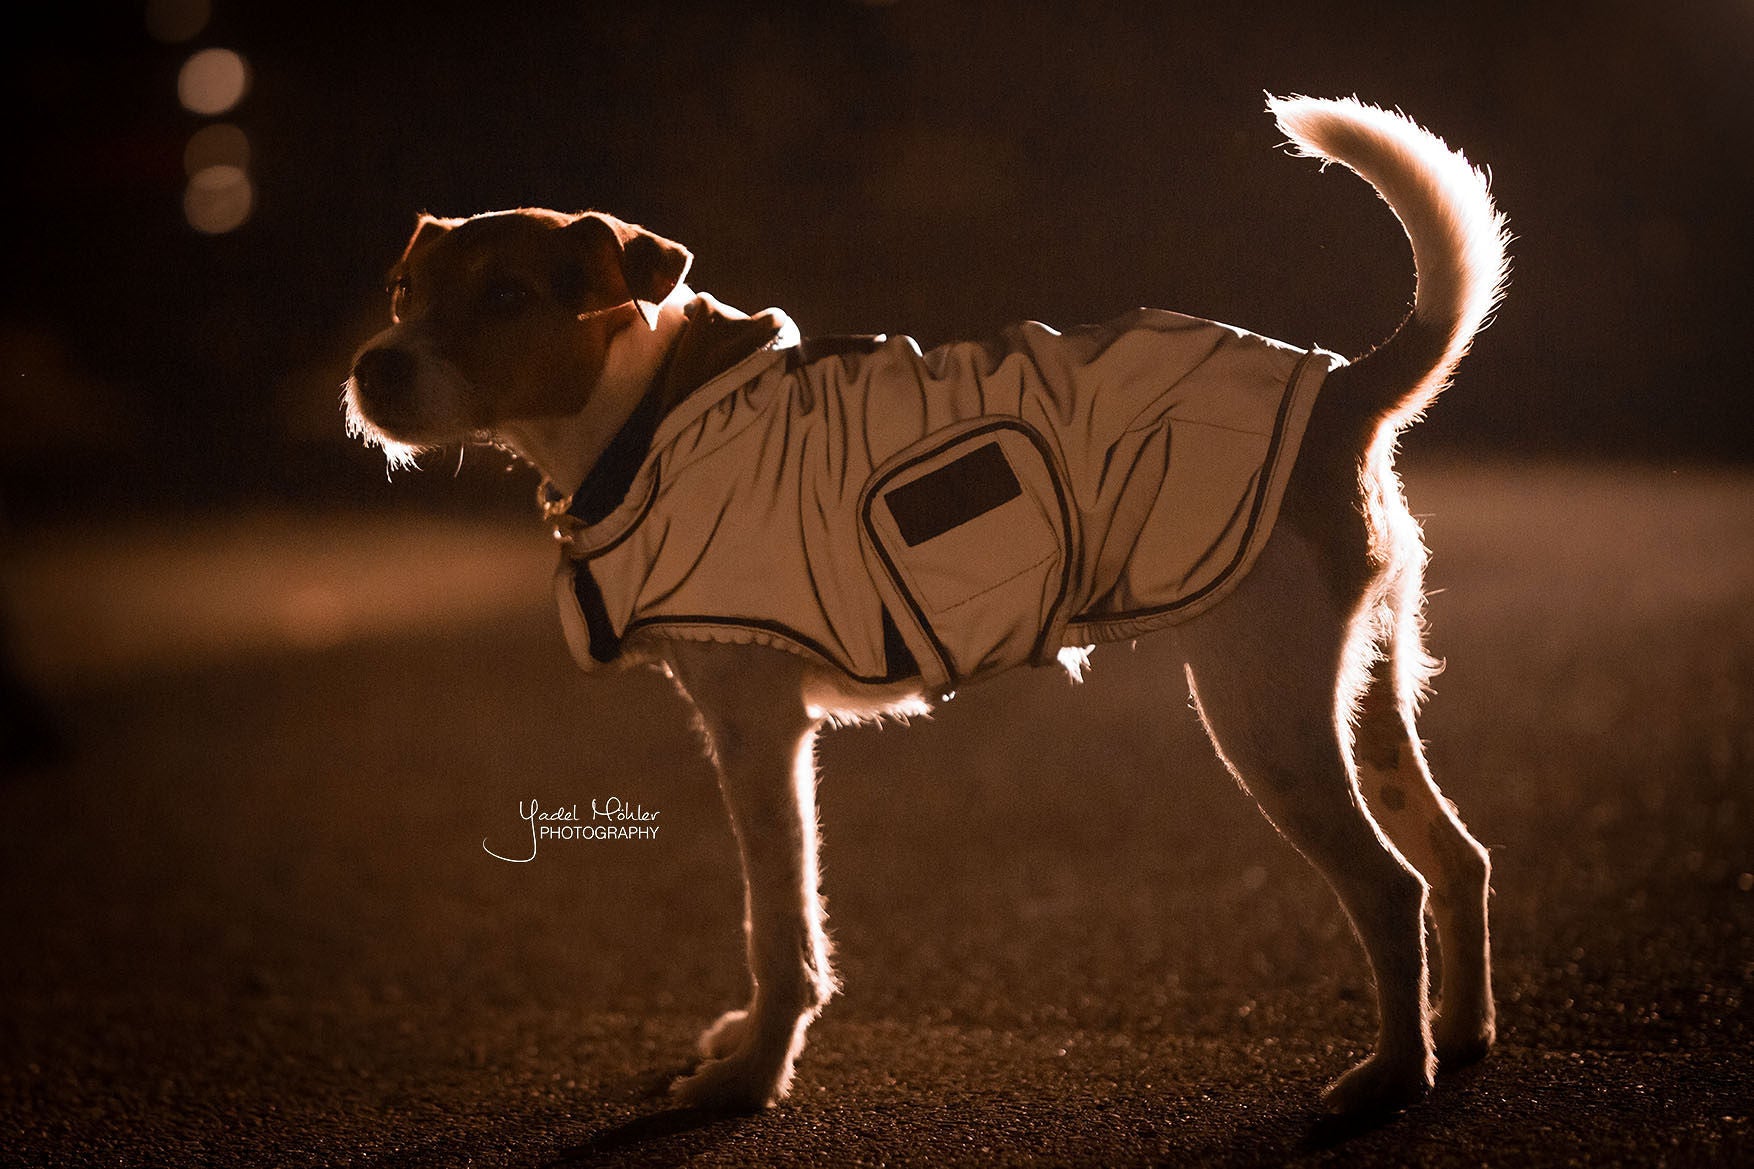 The Kentucky reflective dog coat. This coat is highly reflective and water repellant, sure to keep your dog safe and dry through the winter.    You can fold the hood up or down for more protection if required. Underneath the hood is a hole for the dog lead. Fastened with two wide Velcro straps round the chest and under the stomach. 